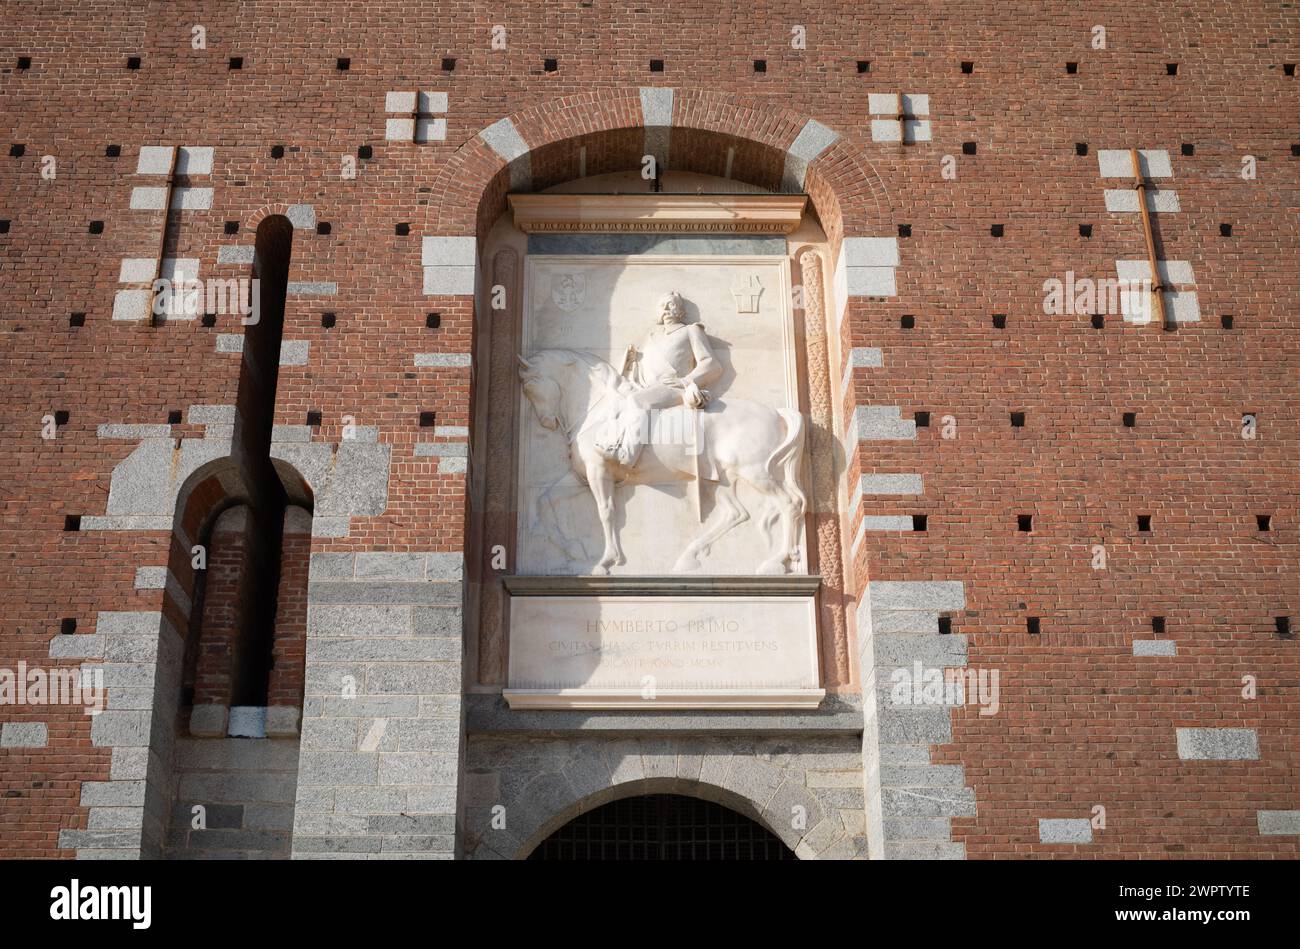 The bas relief of King Umberto I above the main entrance to Castello Sforzesco, or Milan Castle, in the heart of Milan, Italy. Stock Photo